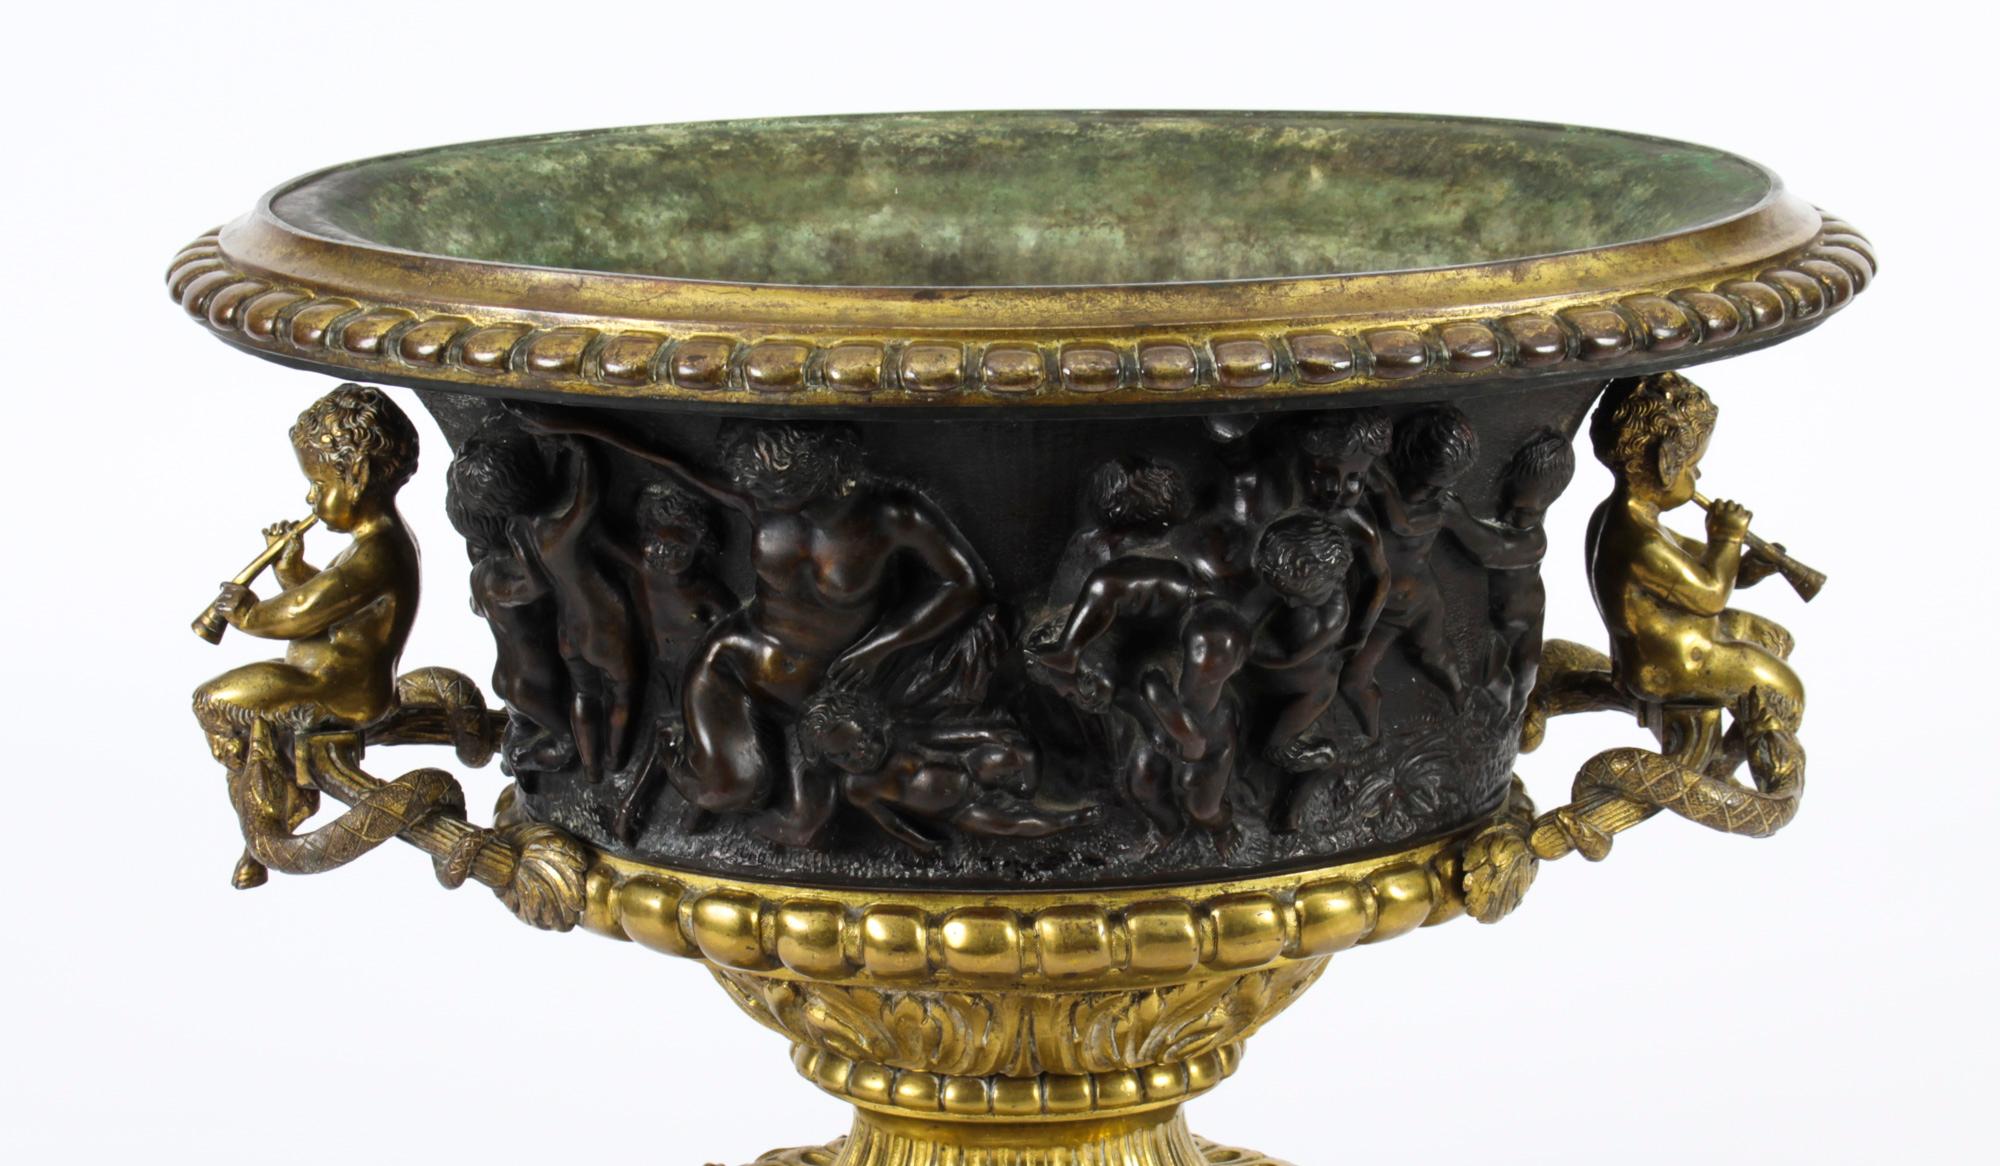 This is a beautiful large antique French Grand Tour dark patinated bronze and ormolu jardiniere, Circa 1830 in date.

This stunning bronze is superbly cast and has an elegant brown patina. The jardiniere features a beaded rim, bifurcated vinestock